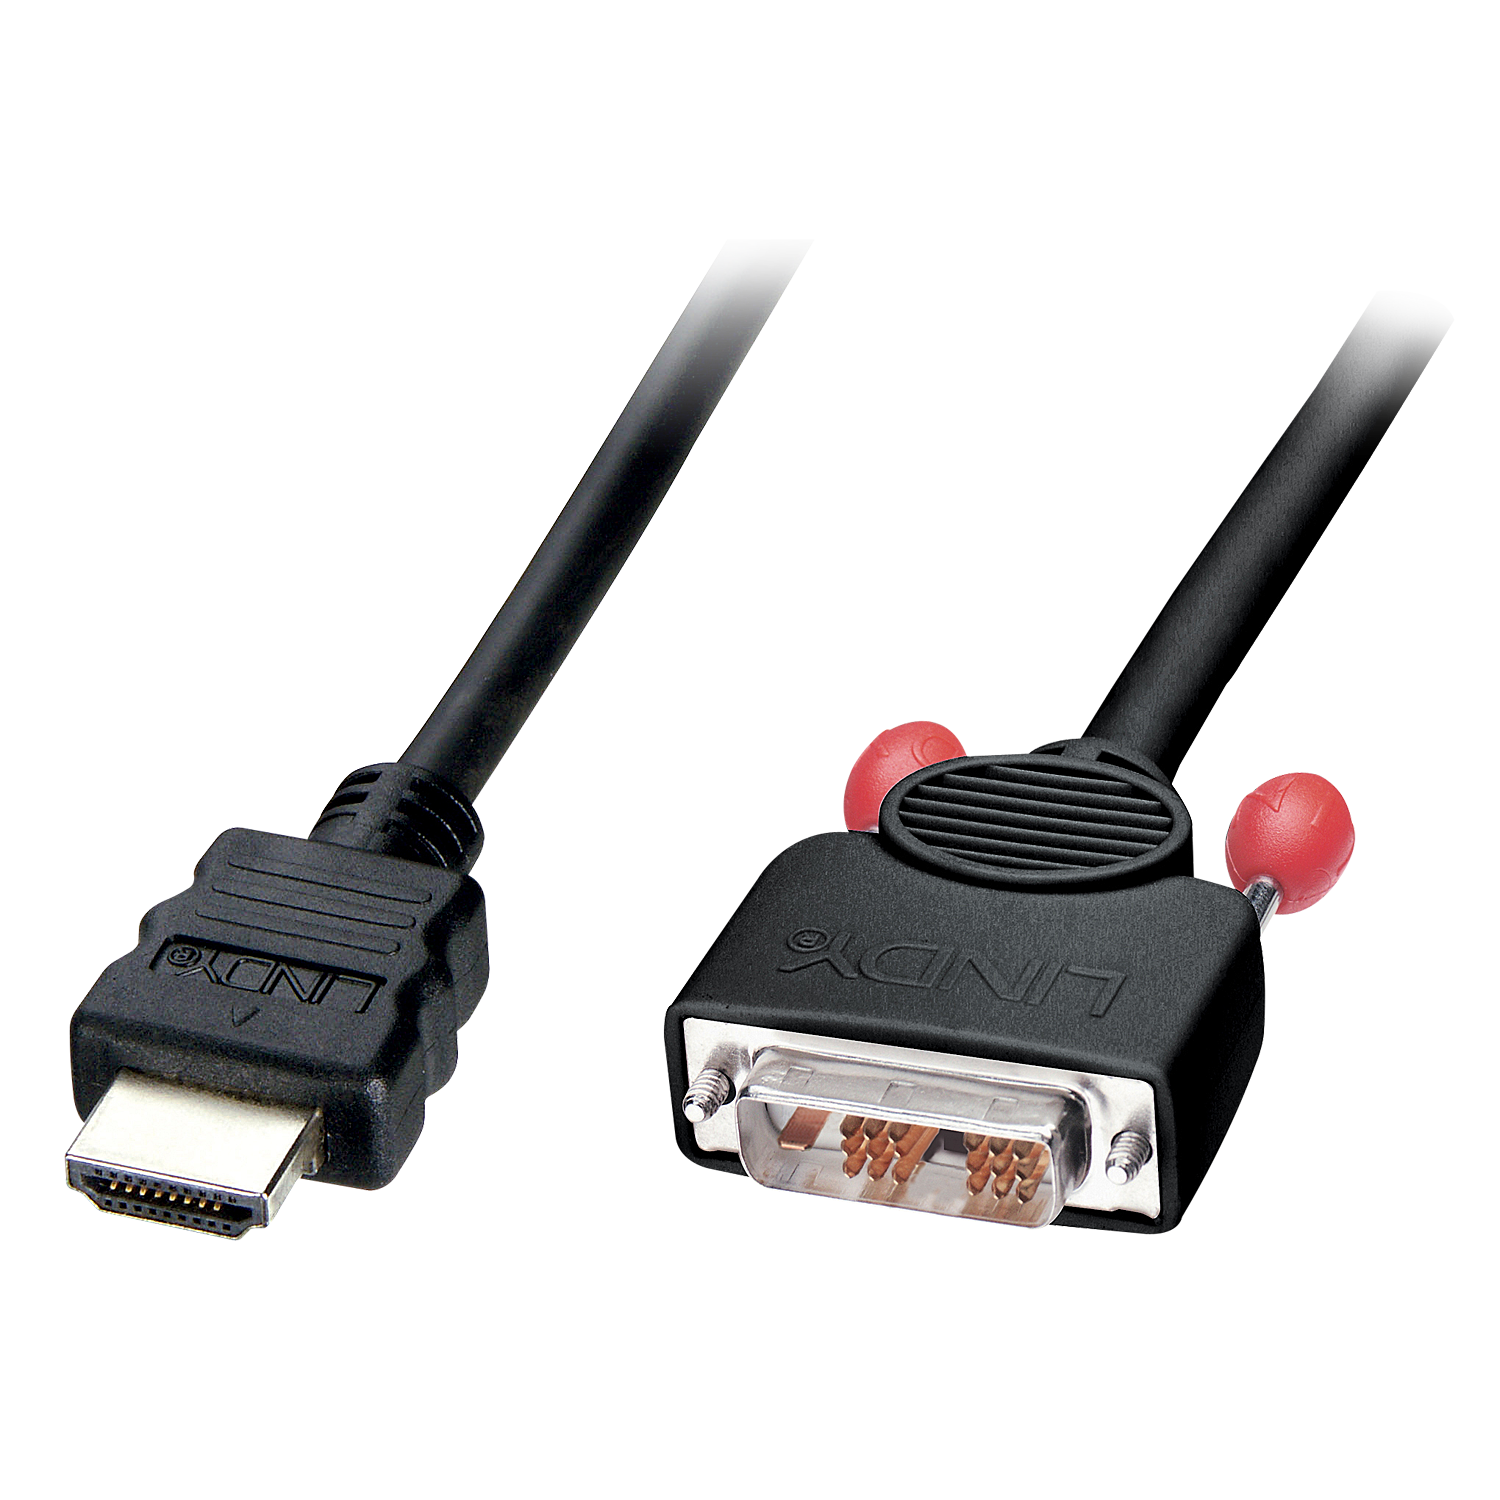 2m HDMI to DVI-D Cable, Black $48 | The Connectivity Center